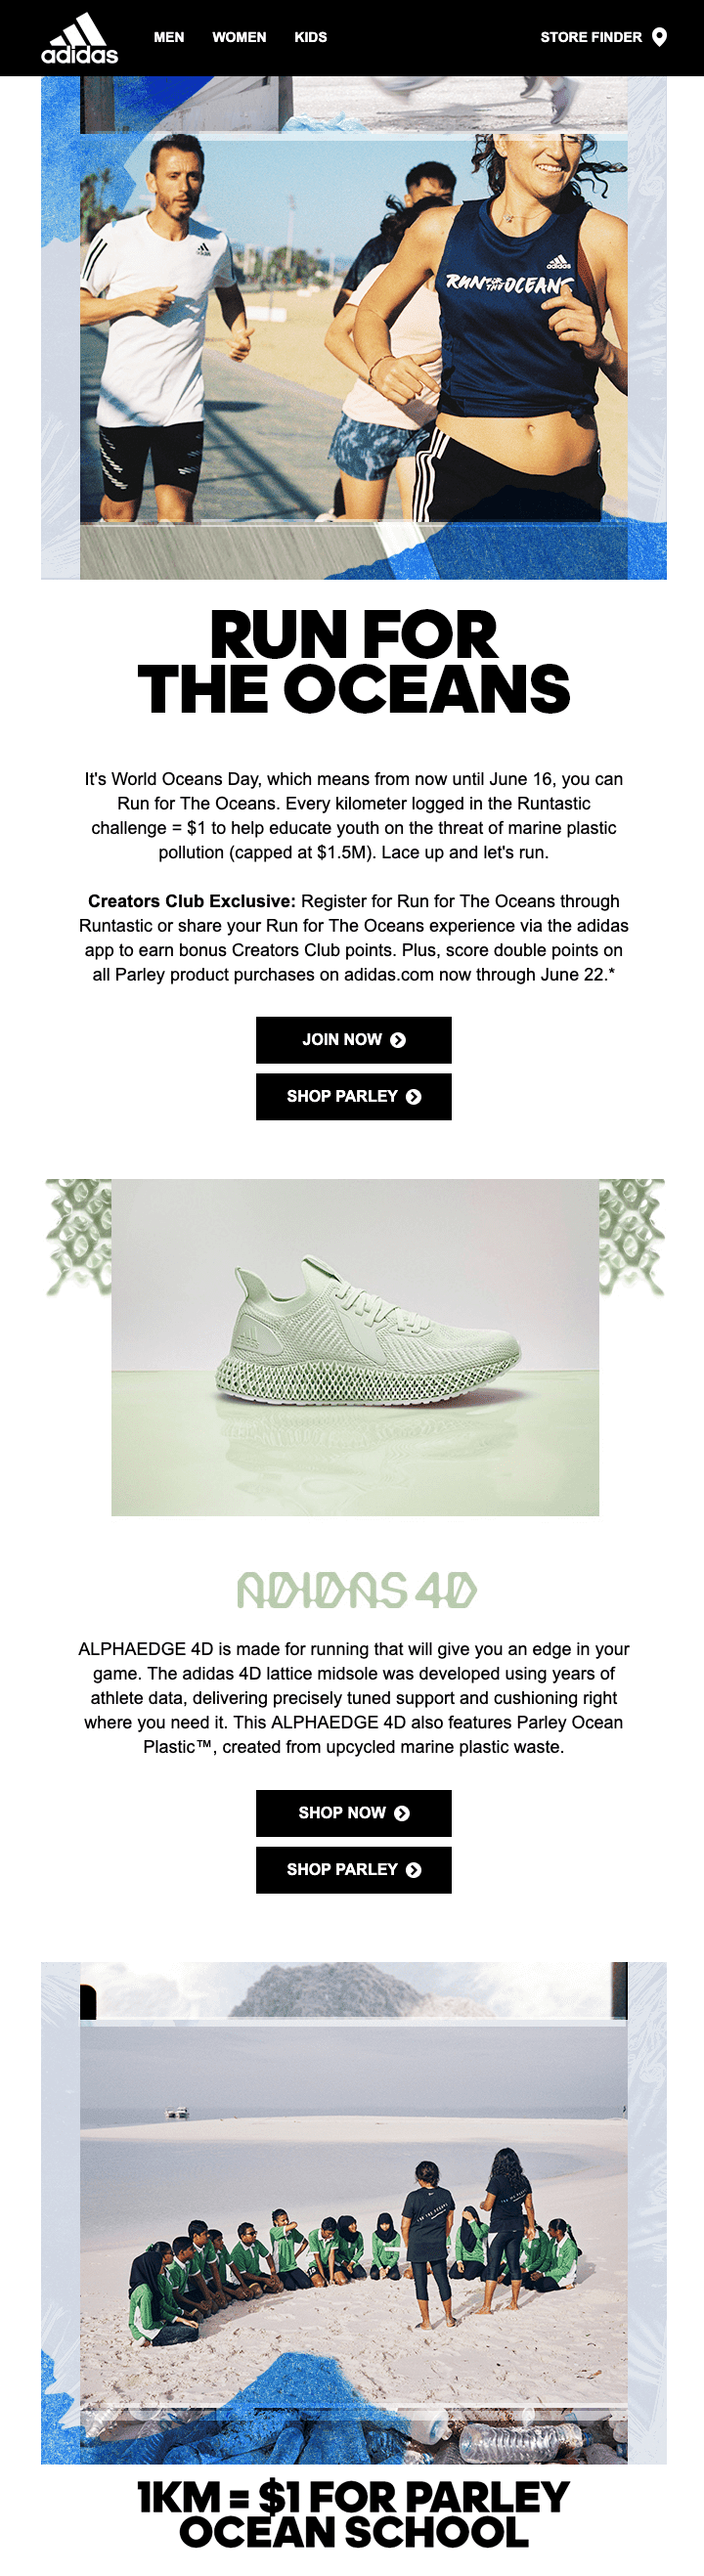 Email Newsletter Example of a long form content from Adidas